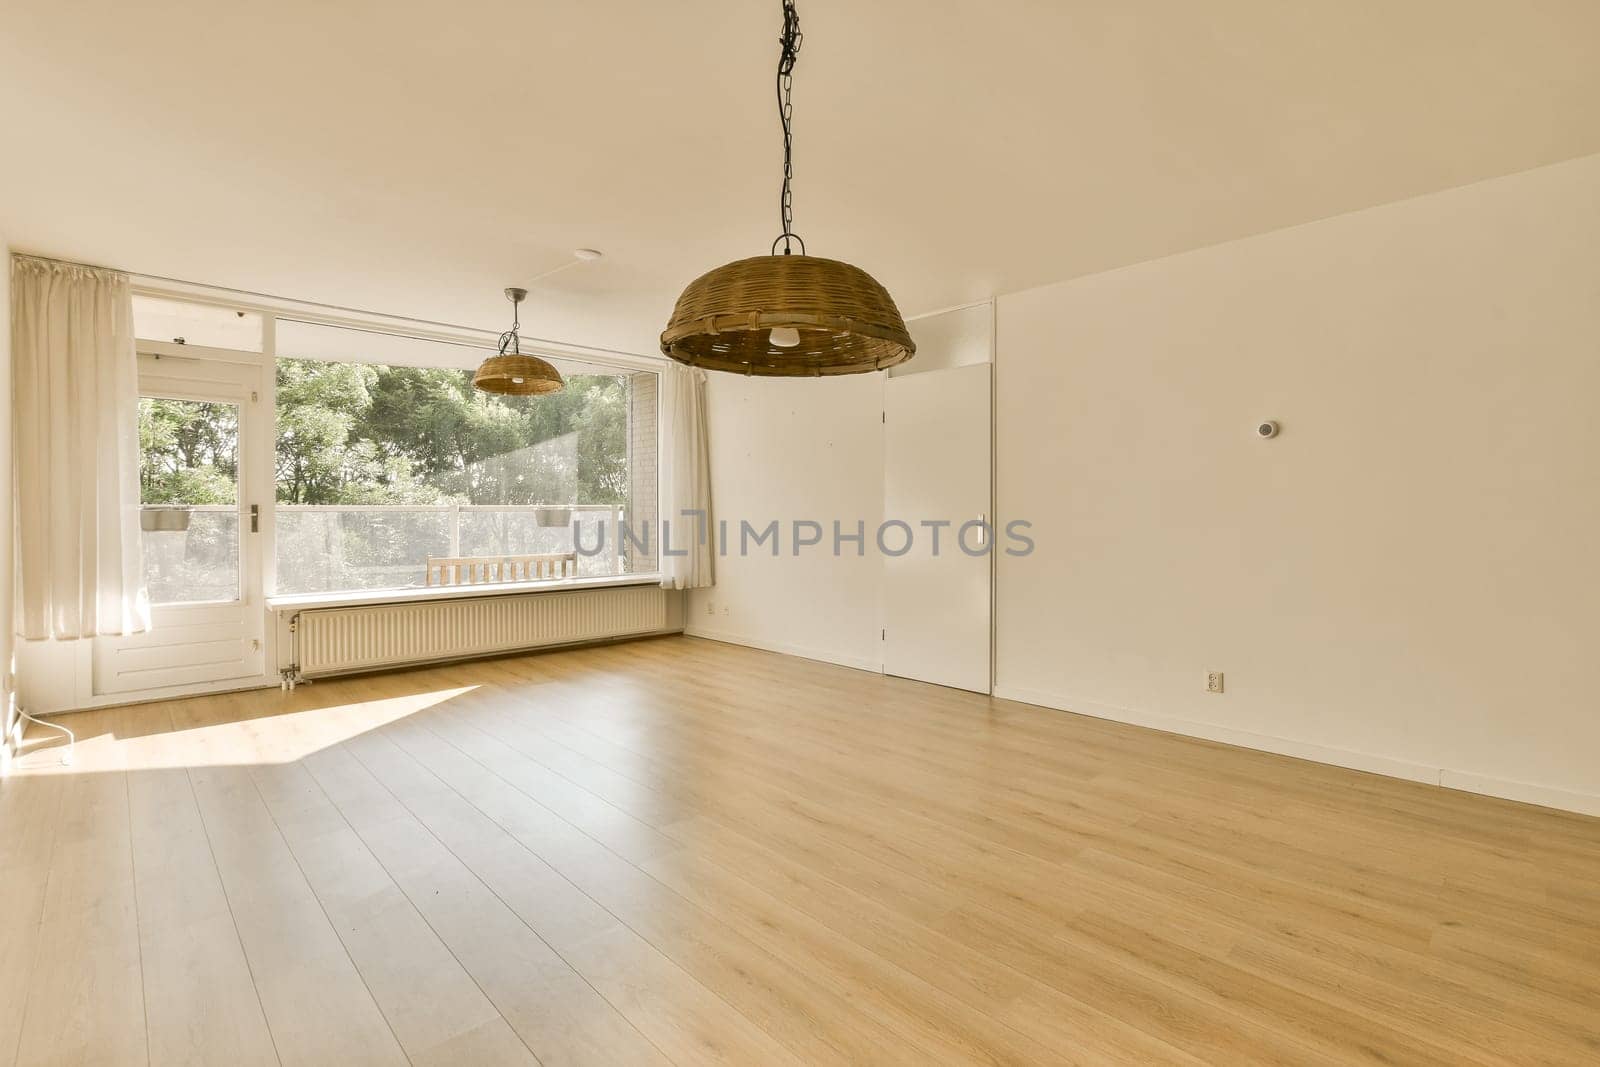 an empty living room with wood flooring and large windows looking out onto the garden area in the back yard